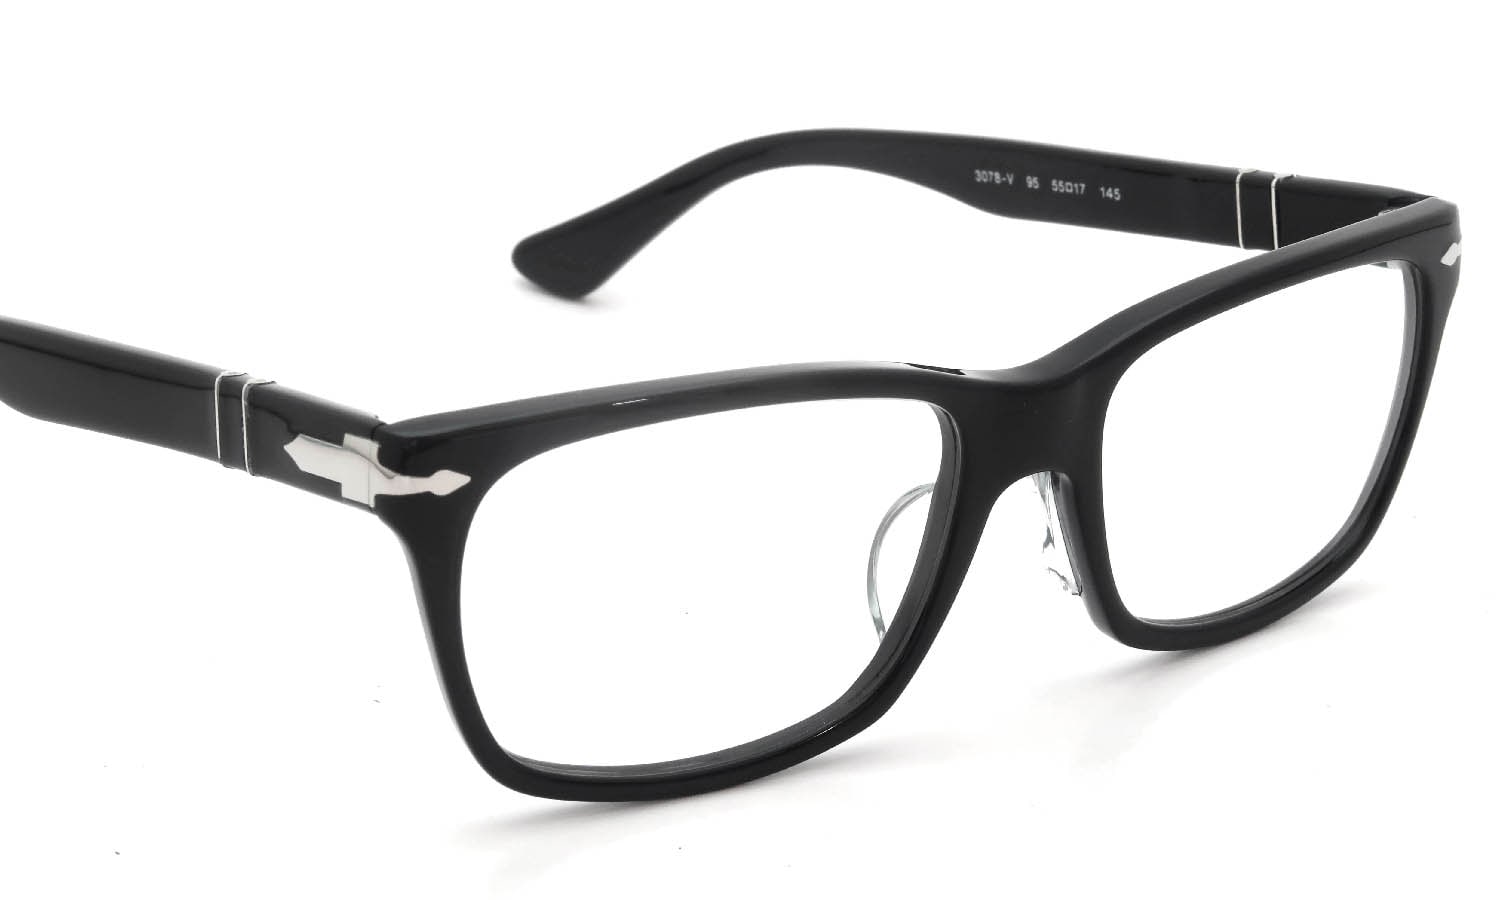 Persol 3078-V 95 55size